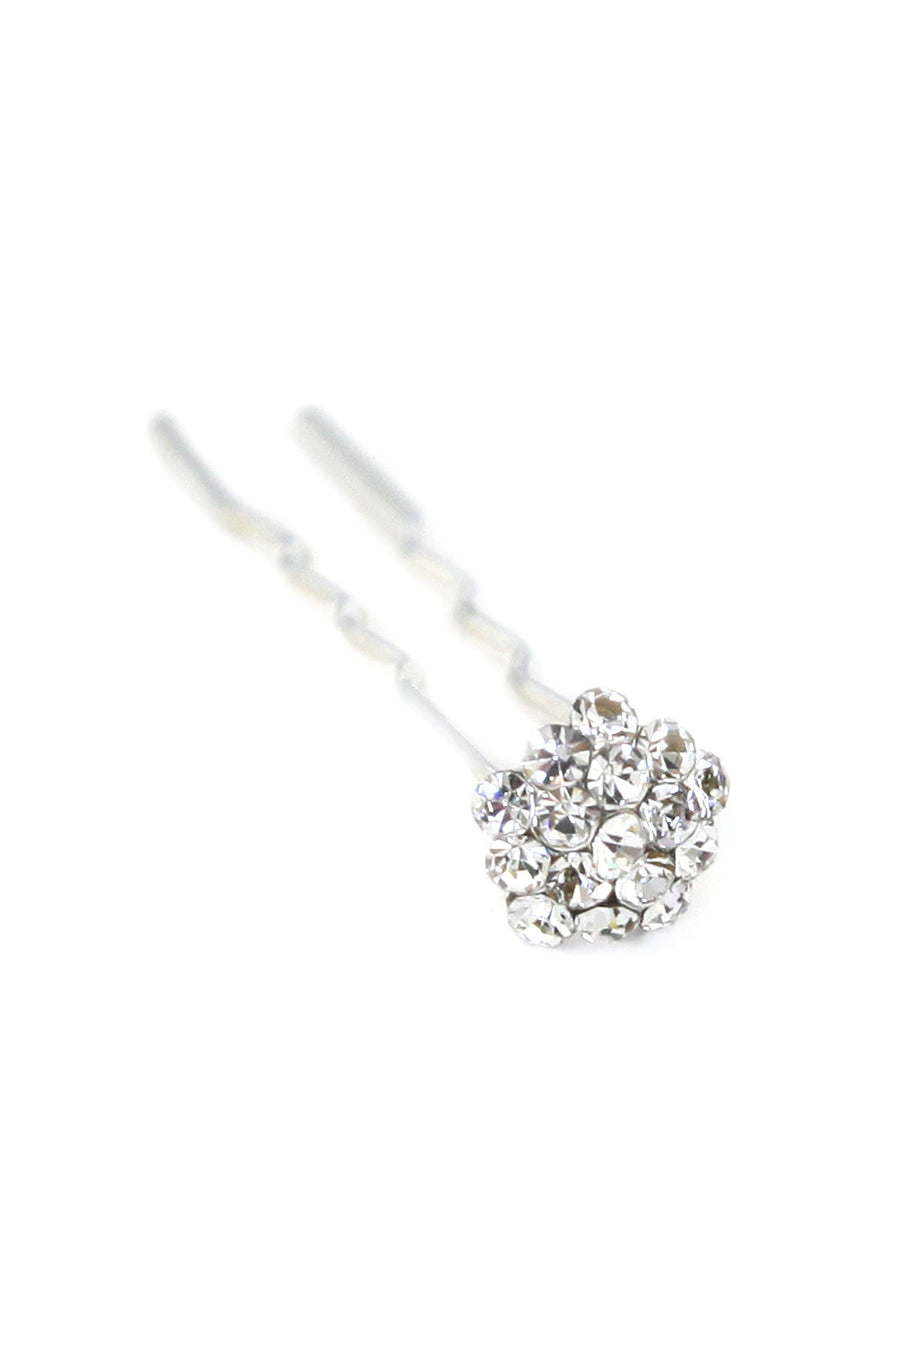 Soho Style Stick Clear Mini Crystal Cluster Hair Stick